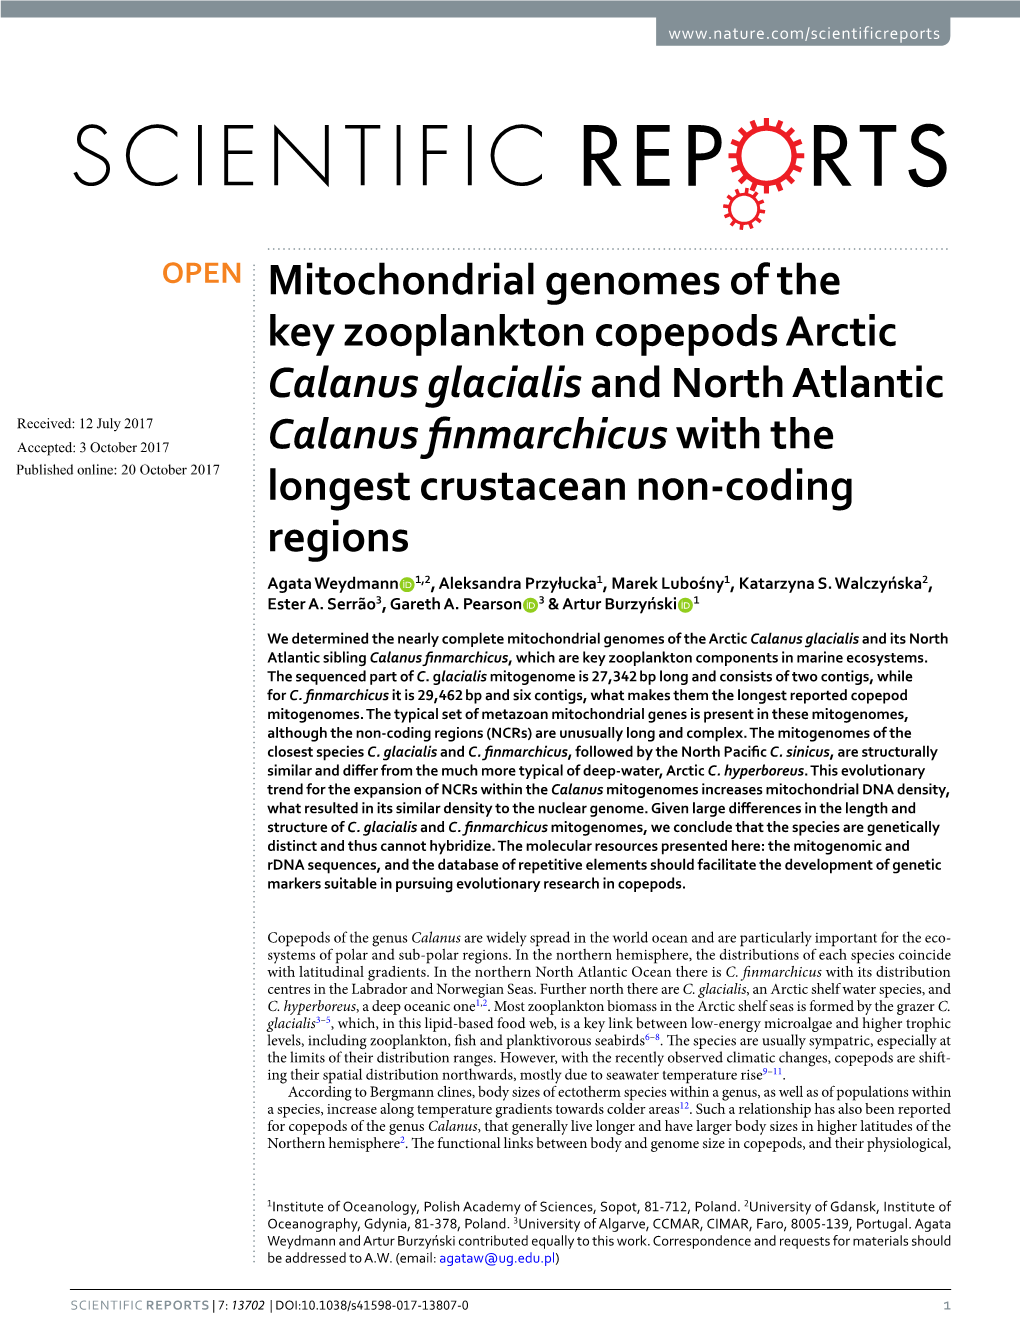 Mitochondrial Genomes of the Key Zooplankton Copepods Arctic Calanus Glacialis and North Atlantic Calanus Finmarchicus With